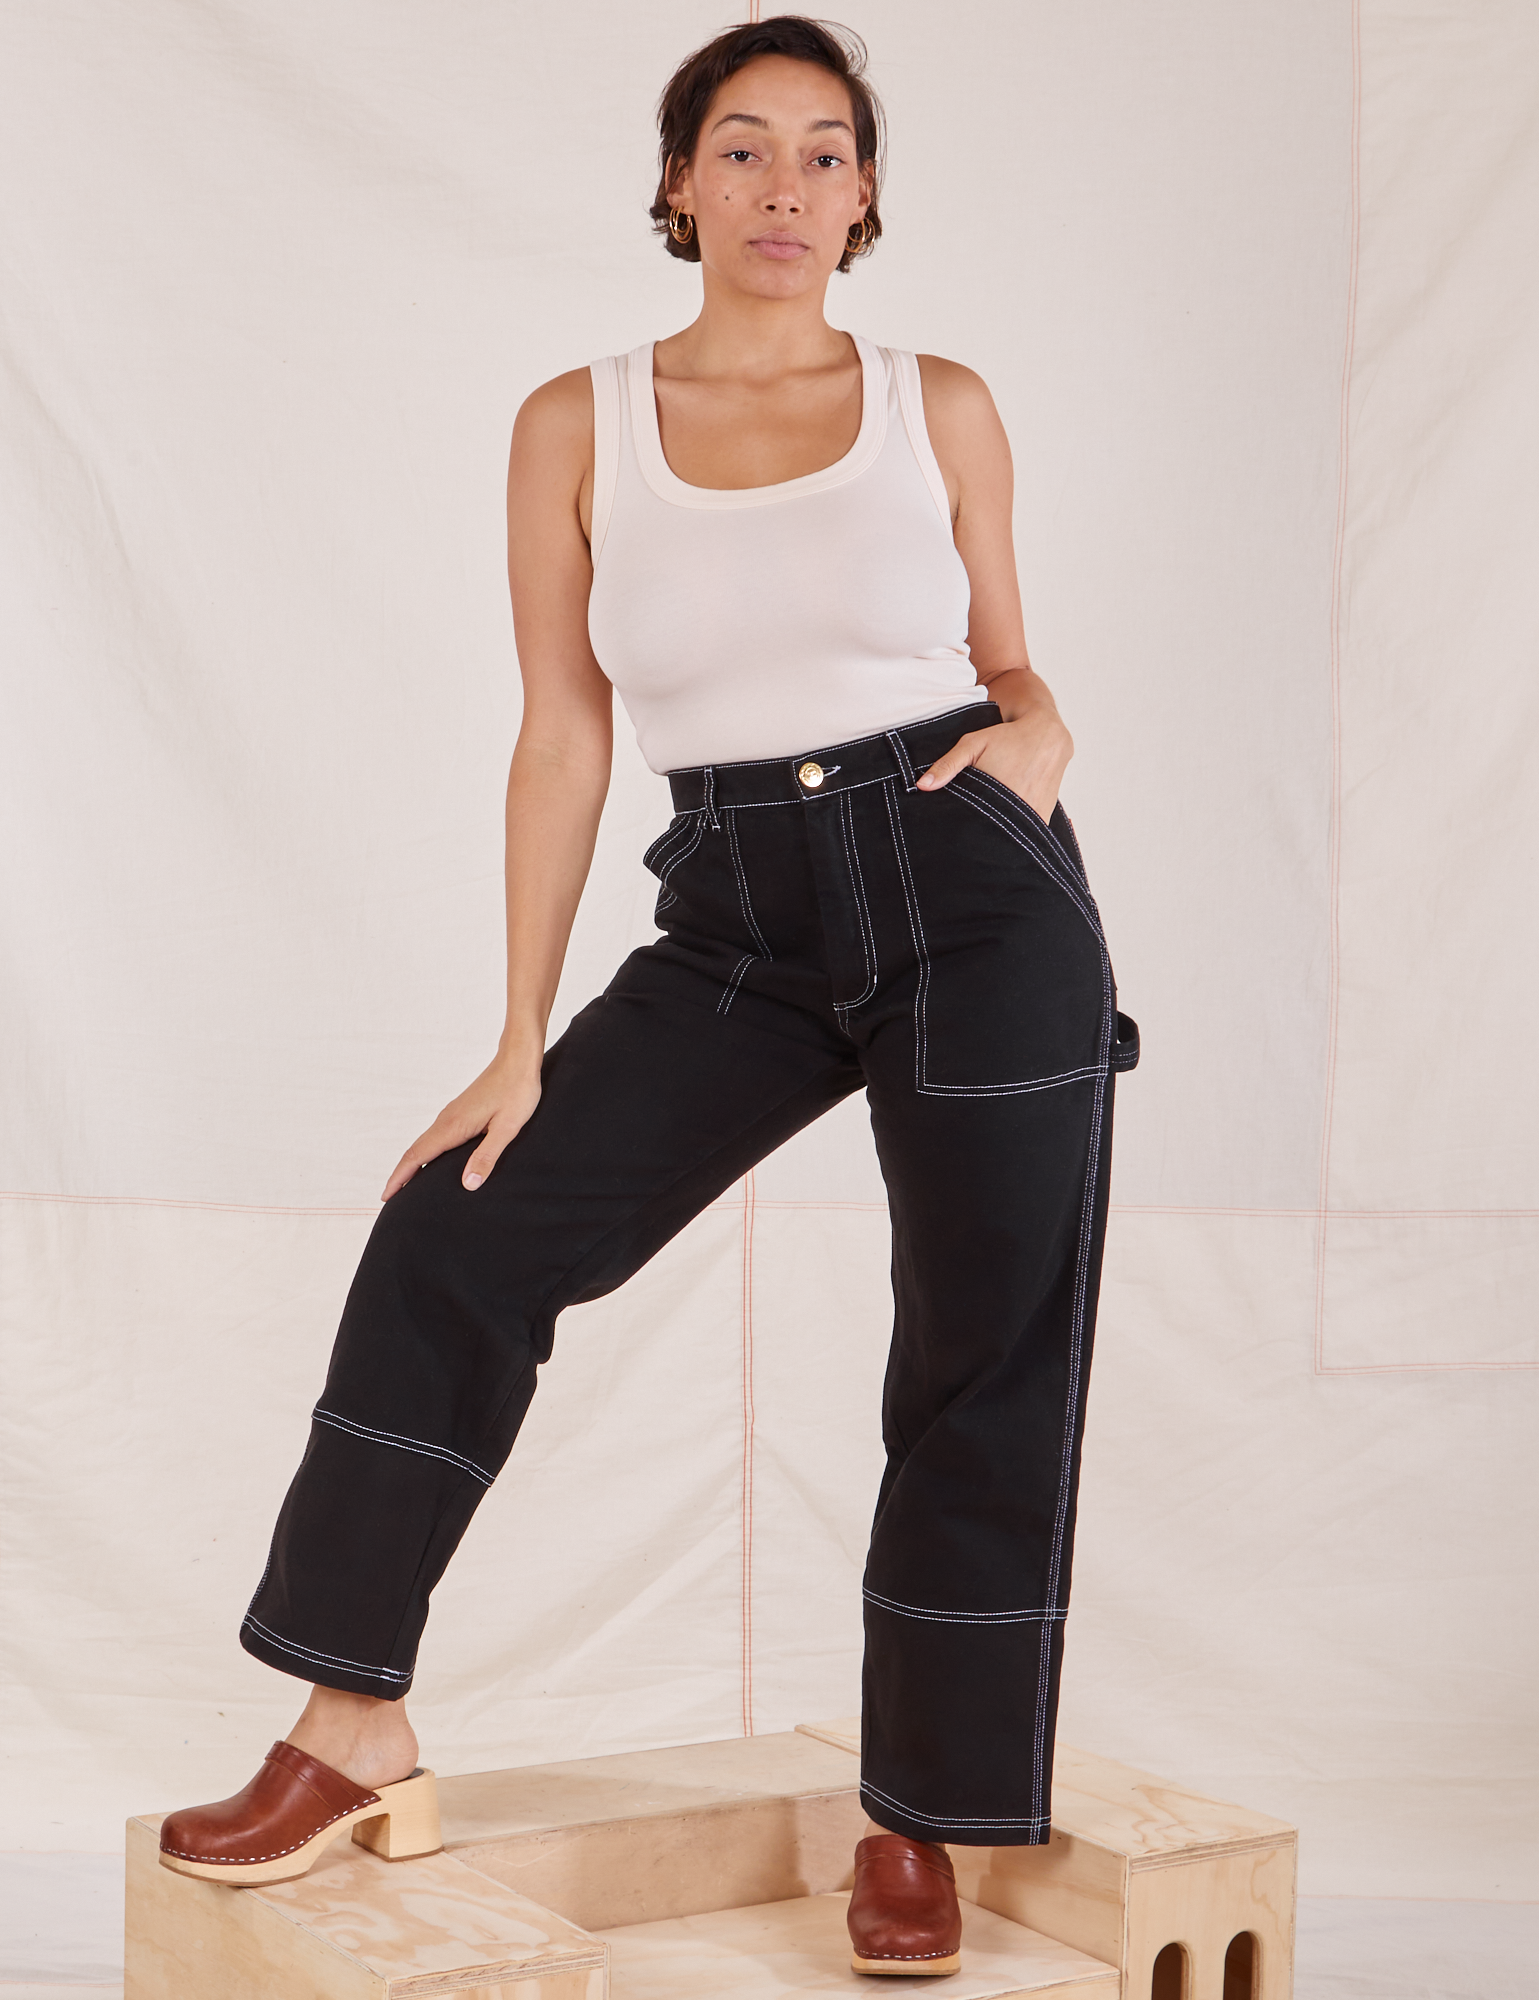 Tiara is 5&#39;4&quot; and wearing S Carpenter Jeans in Black paired with vintage off-white Tank Top